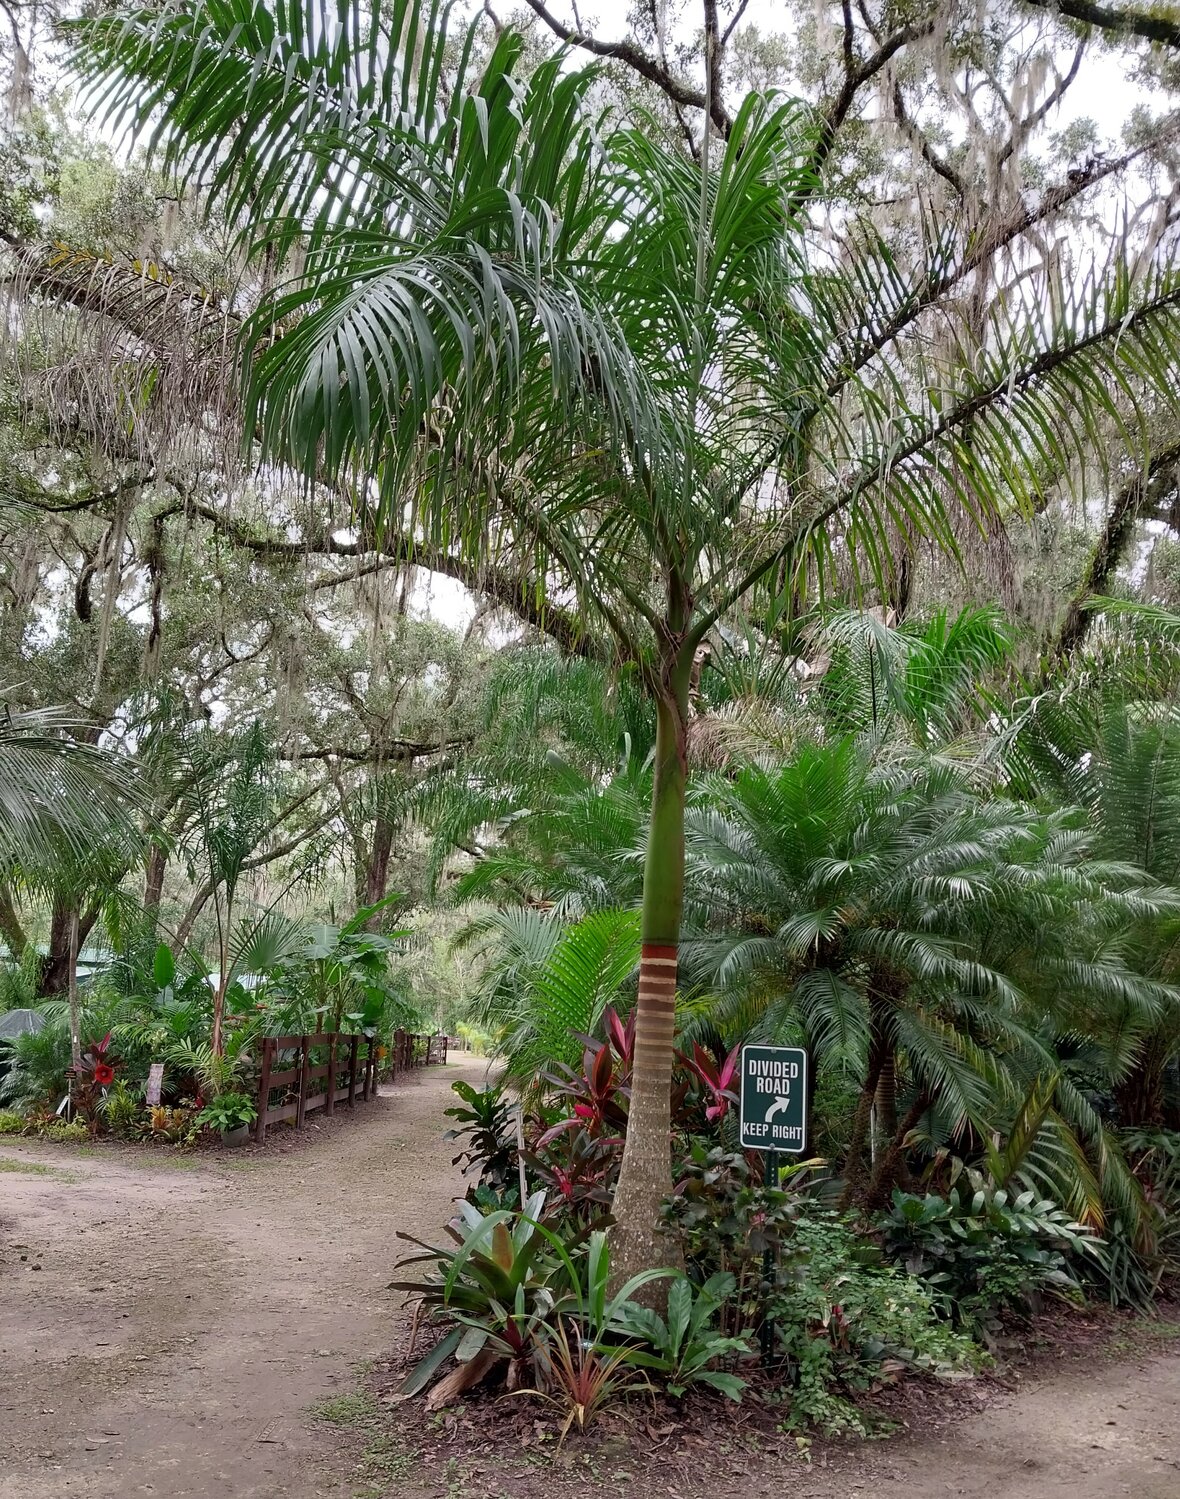 The Royal Palm can be found in Cuba, Central America and Florida.